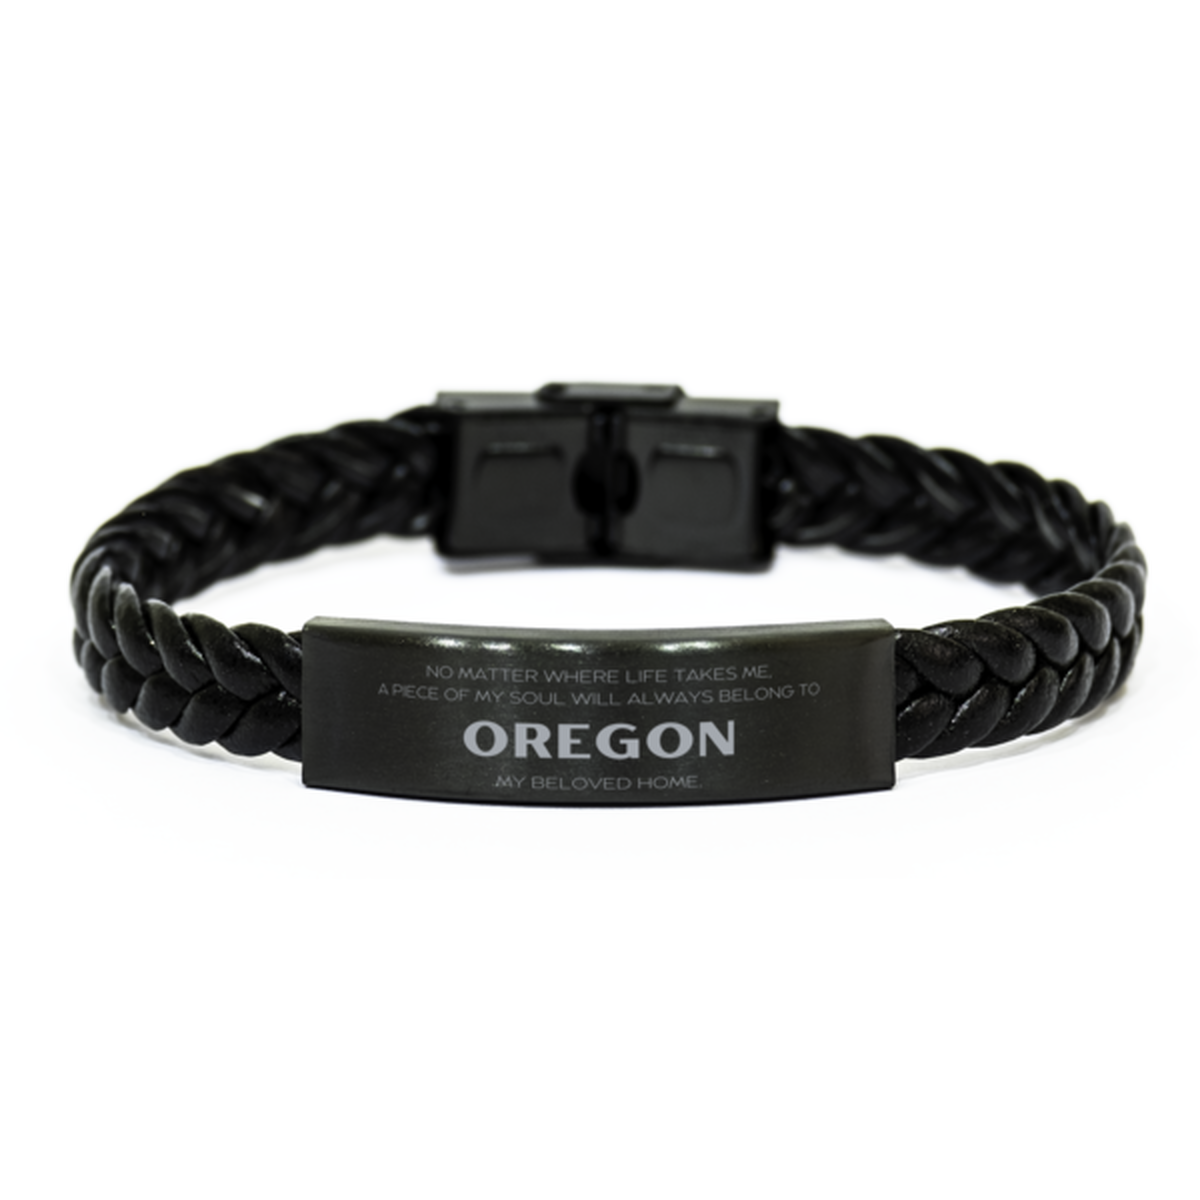 Love Oregon State Gifts, My soul will always belong to Oregon, Proud Braided Leather Bracelet, Birthday Unique Gifts For Oregon Men, Women, Friends